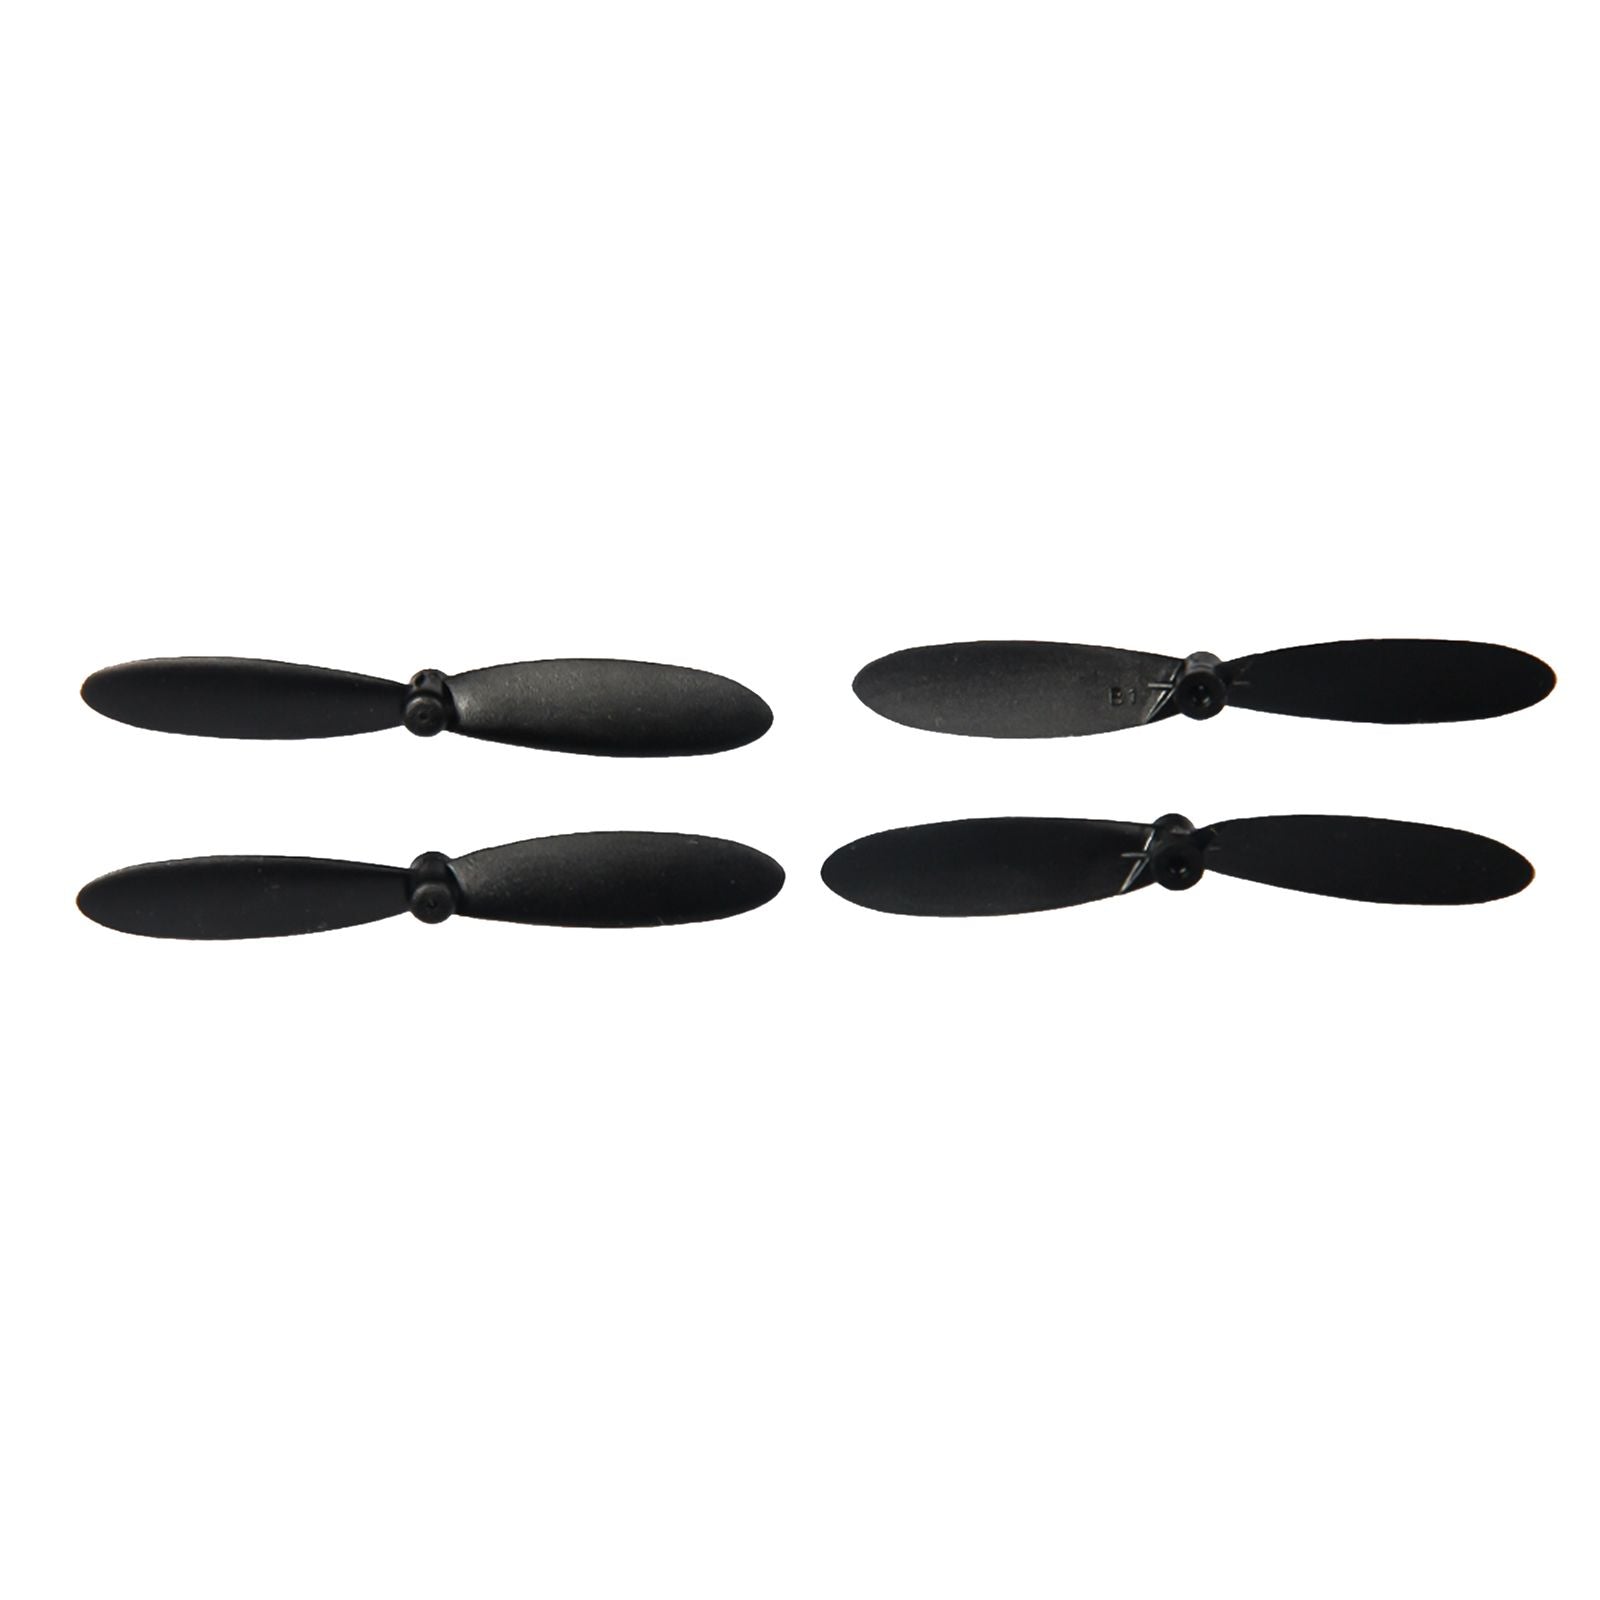 4x Propeller Props Blades Drone Quadcopter Accessory Replacement Spare Part